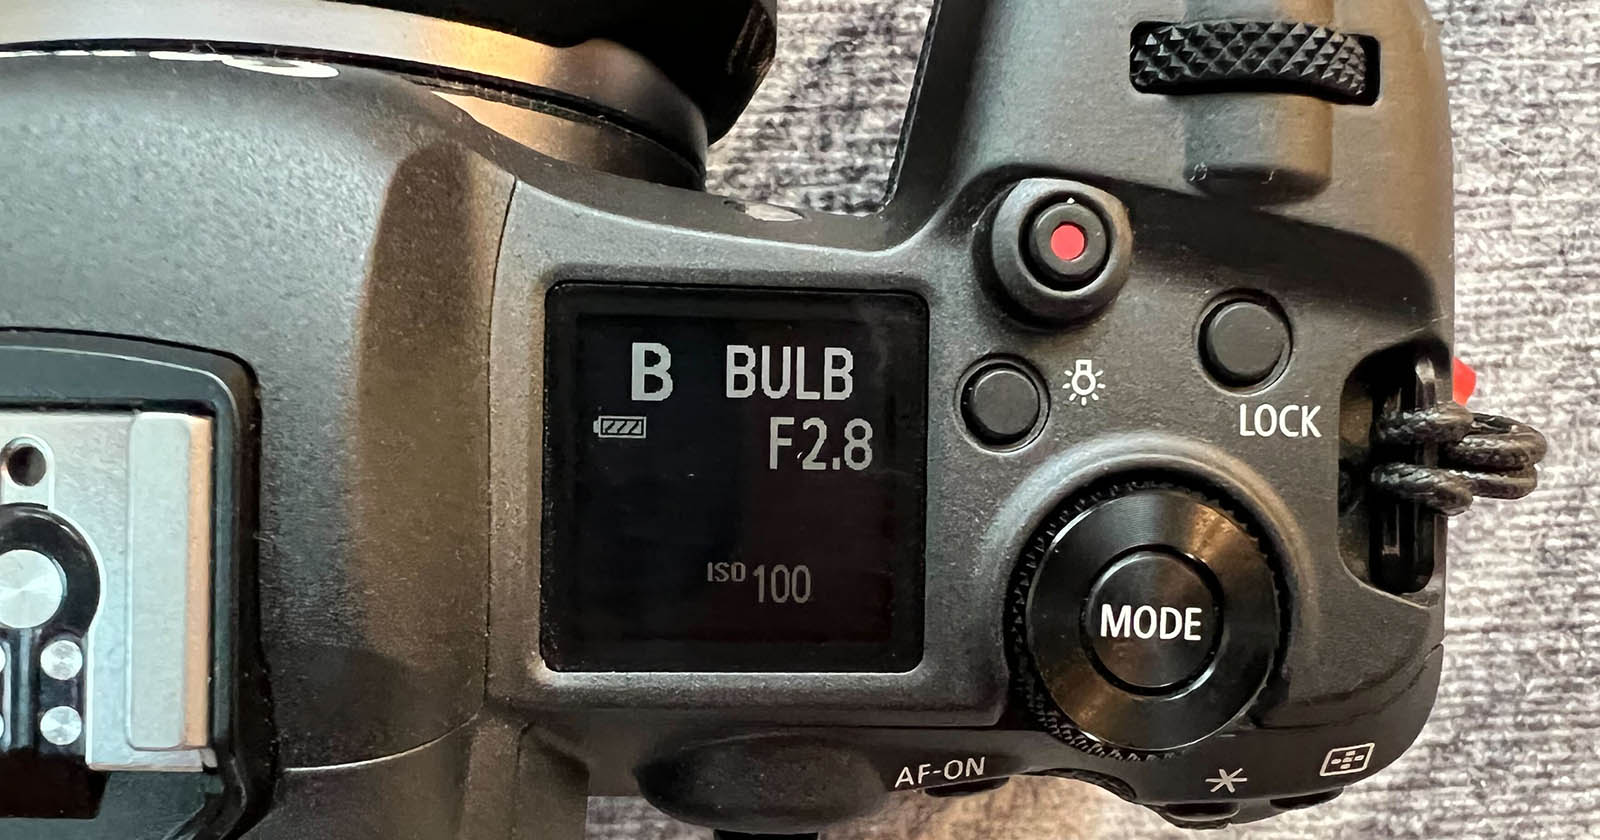 How to Use Bulb Mode on a Camera for Long Exposure Photos